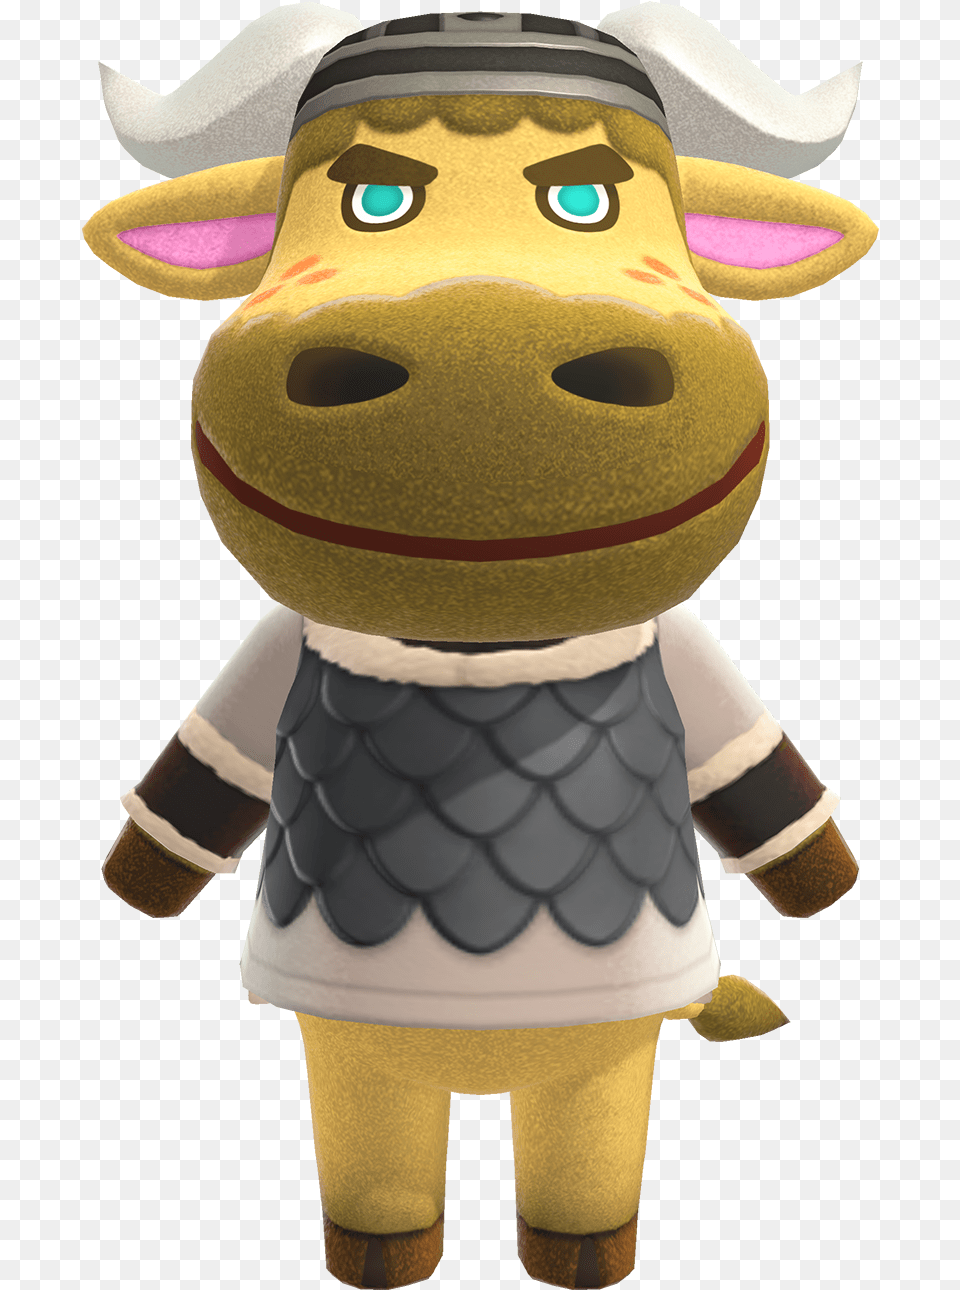 Vic Animal Crossing Wiki Nookipedia Animal Crossing New Horizons Vic, Plush, Toy, Baby, Person Png Image